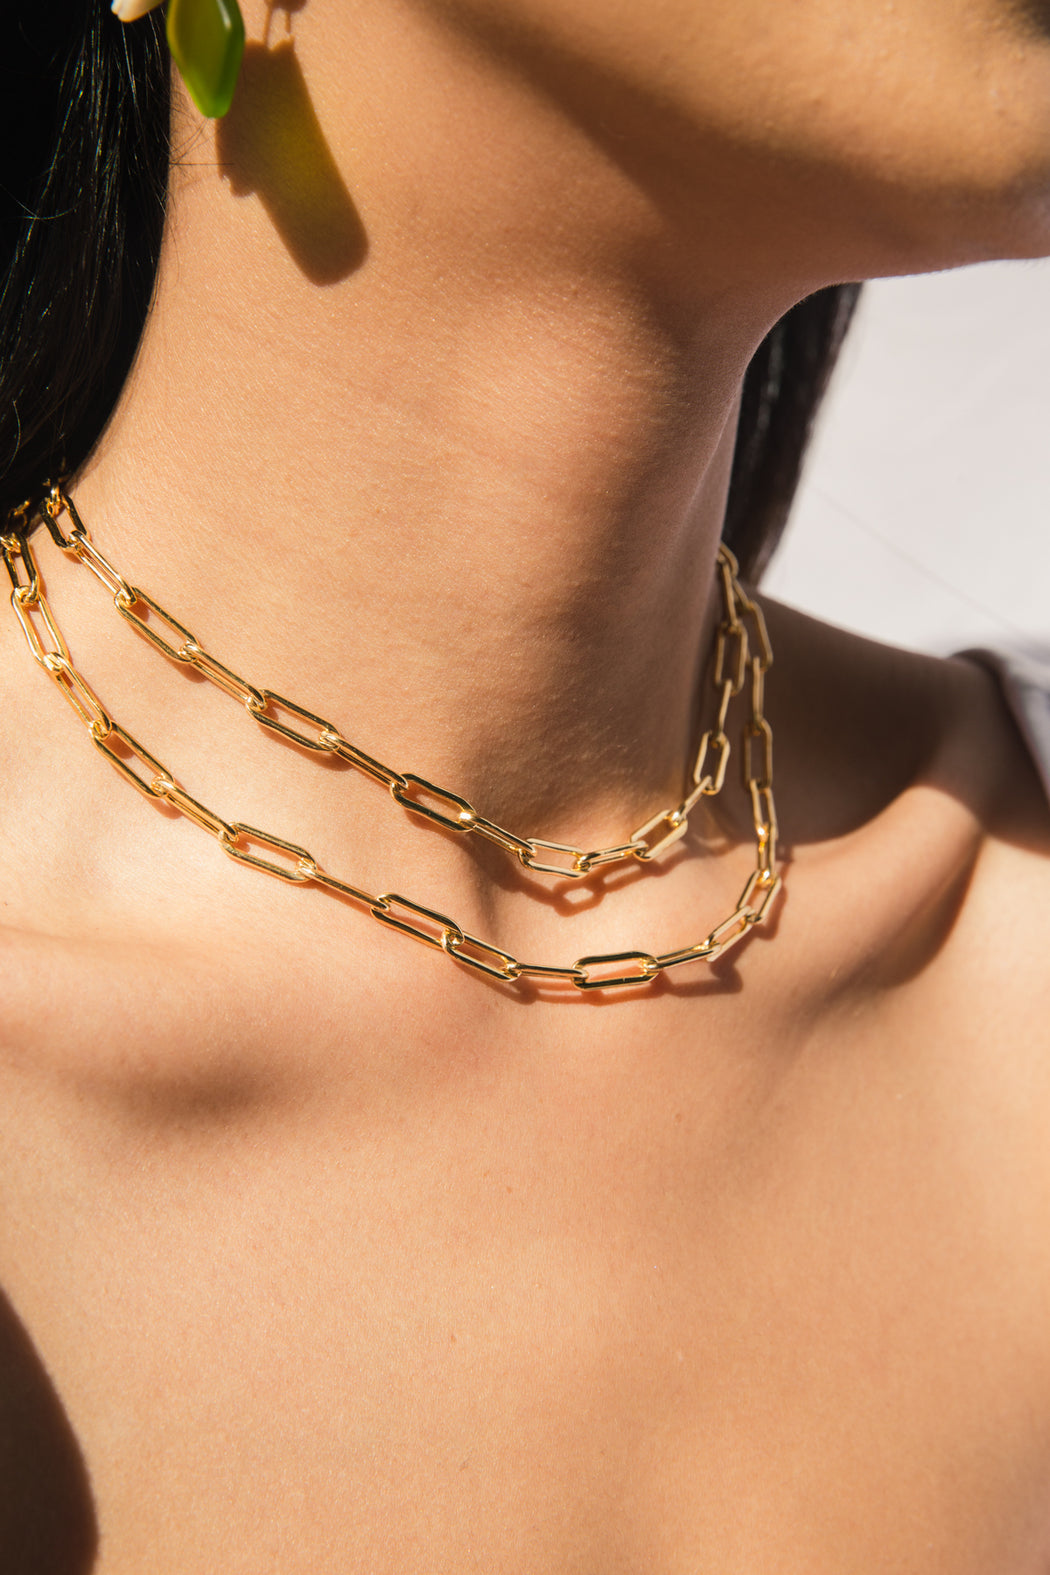 Gold Rectangle Chain Necklace, 14k Gold Filled, Link Chain Necklace